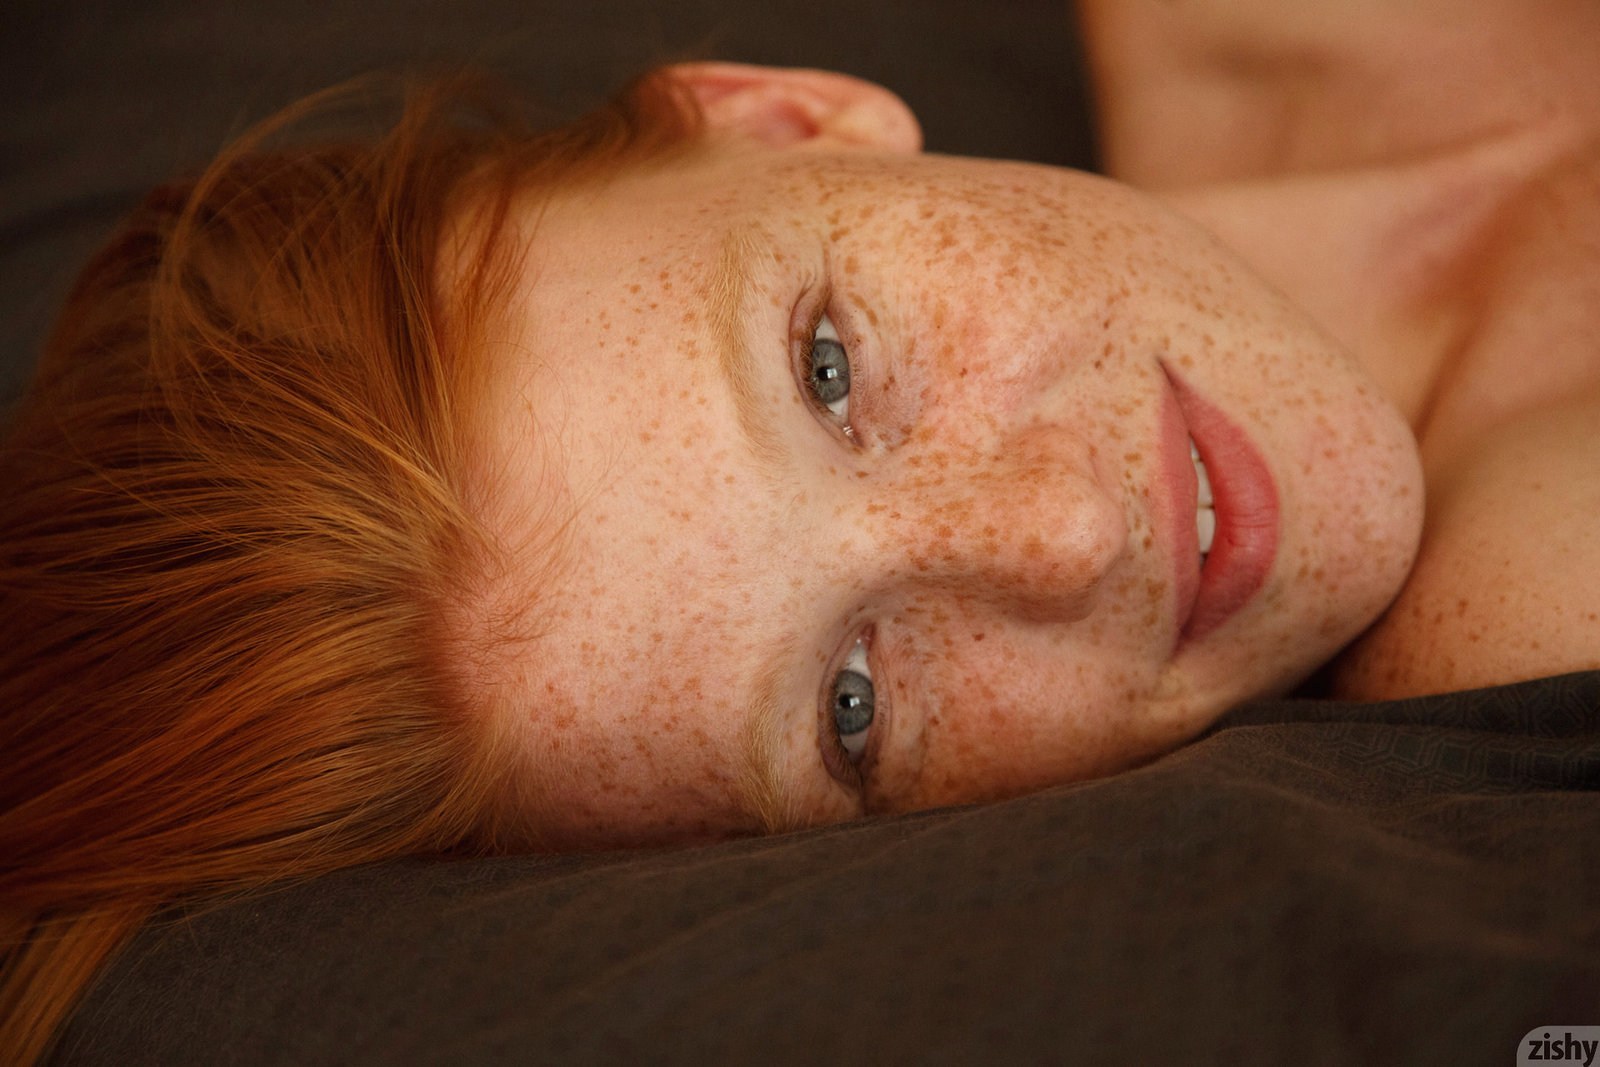 Sex with A Redhead with Freckles (55 photos) - motherless porn pics